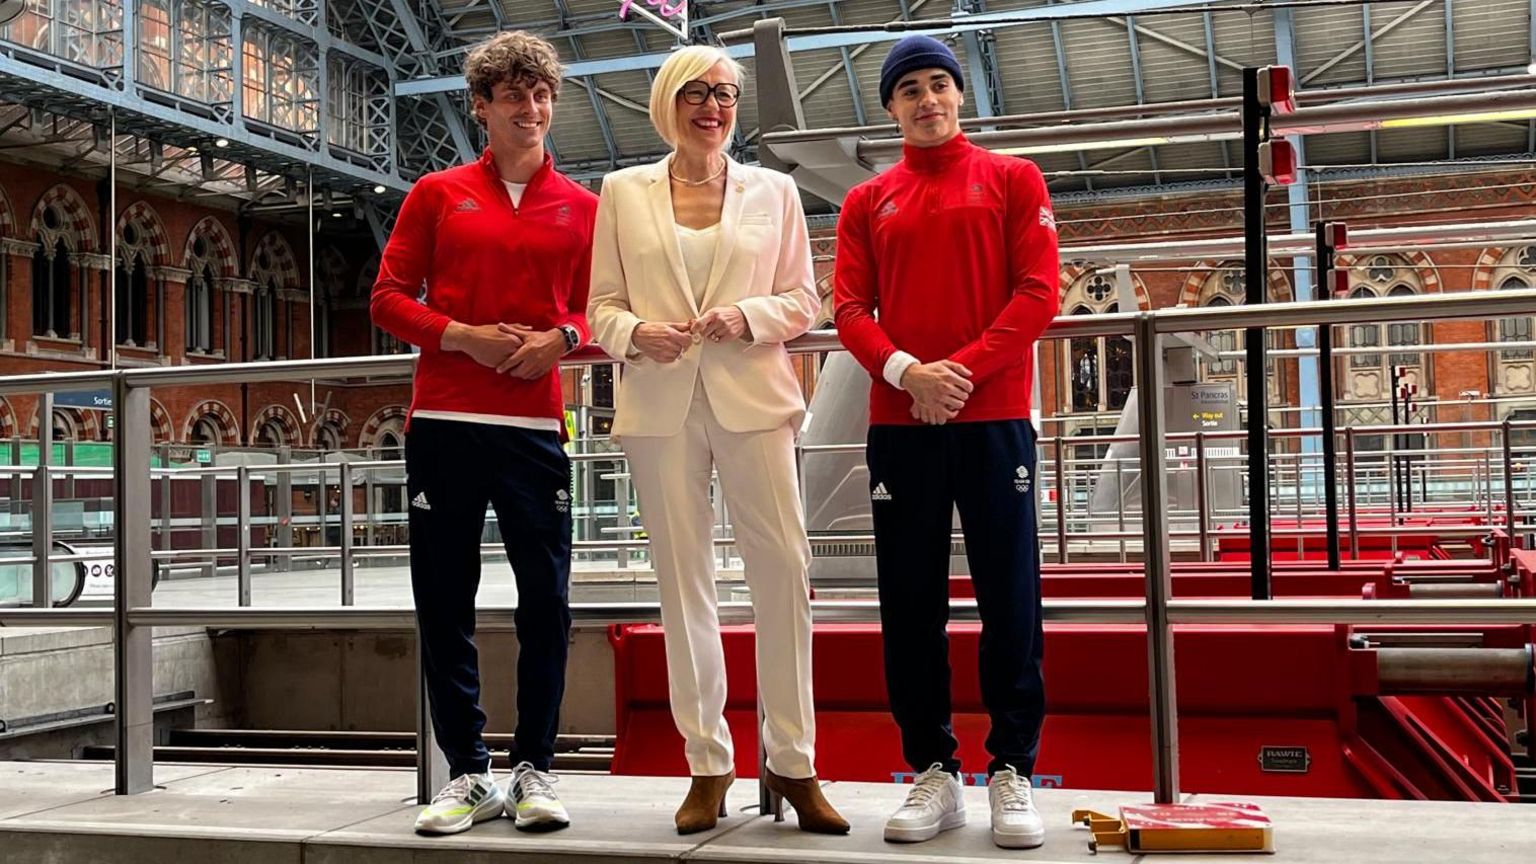 Eurostar's Gwendoline Cazenave with Team GB athletes at London St Pancras station